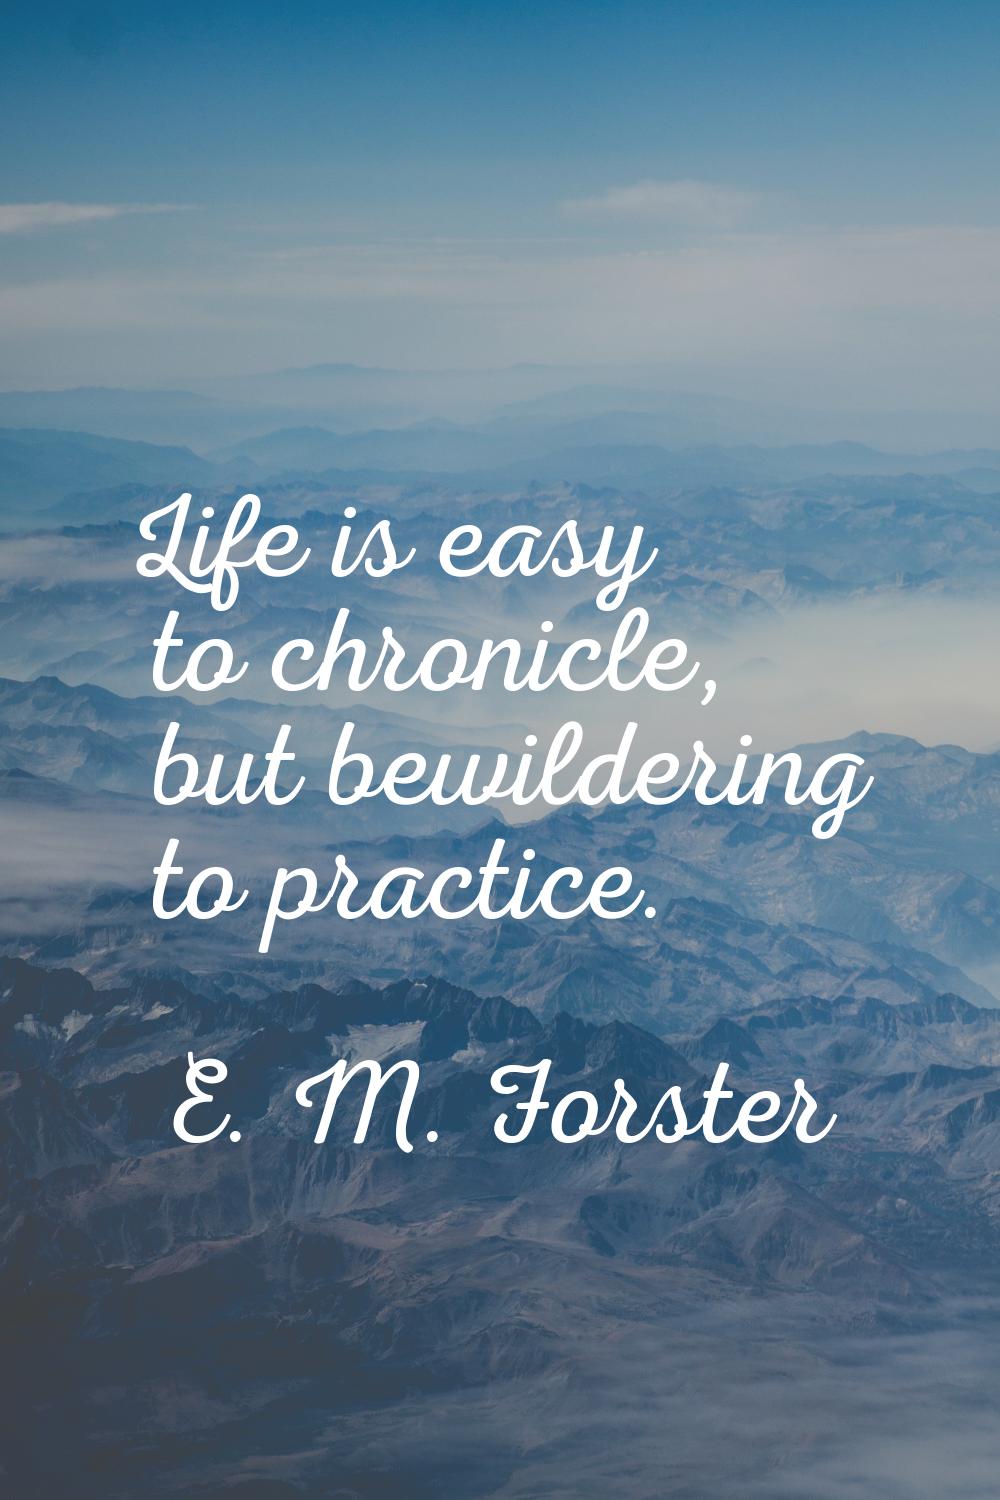 Life is easy to chronicle, but bewildering to practice.